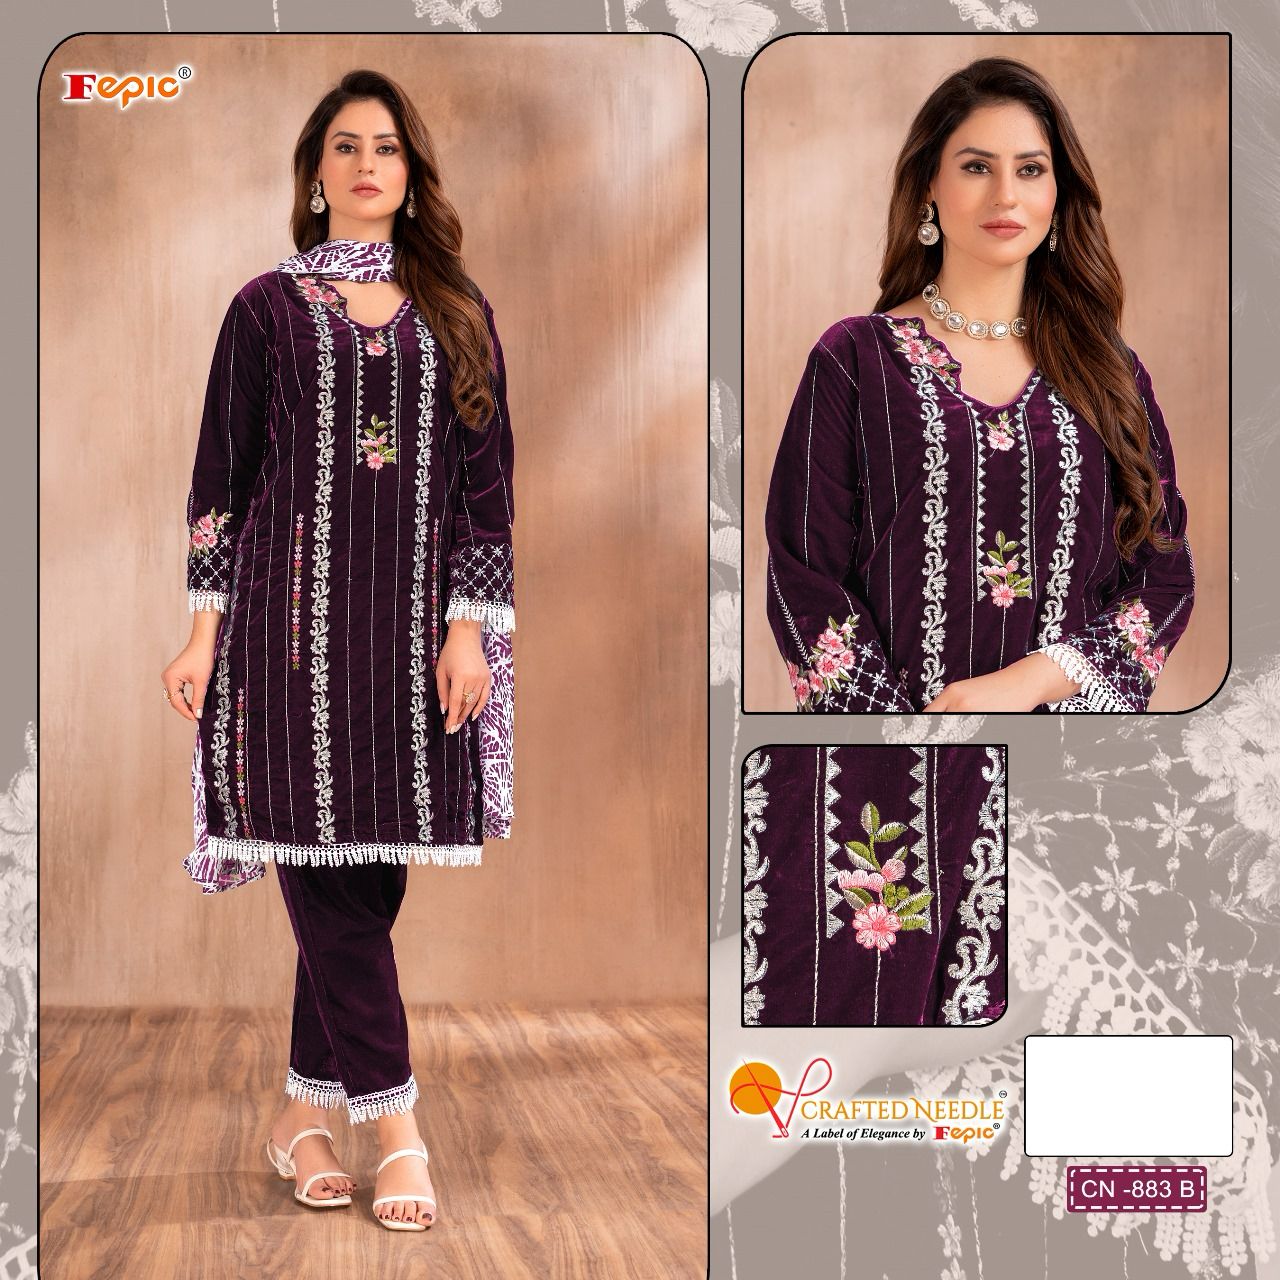 FEPIC CN 883 B CRAFTED NEEDLE READYMADE SALWAR SUITS